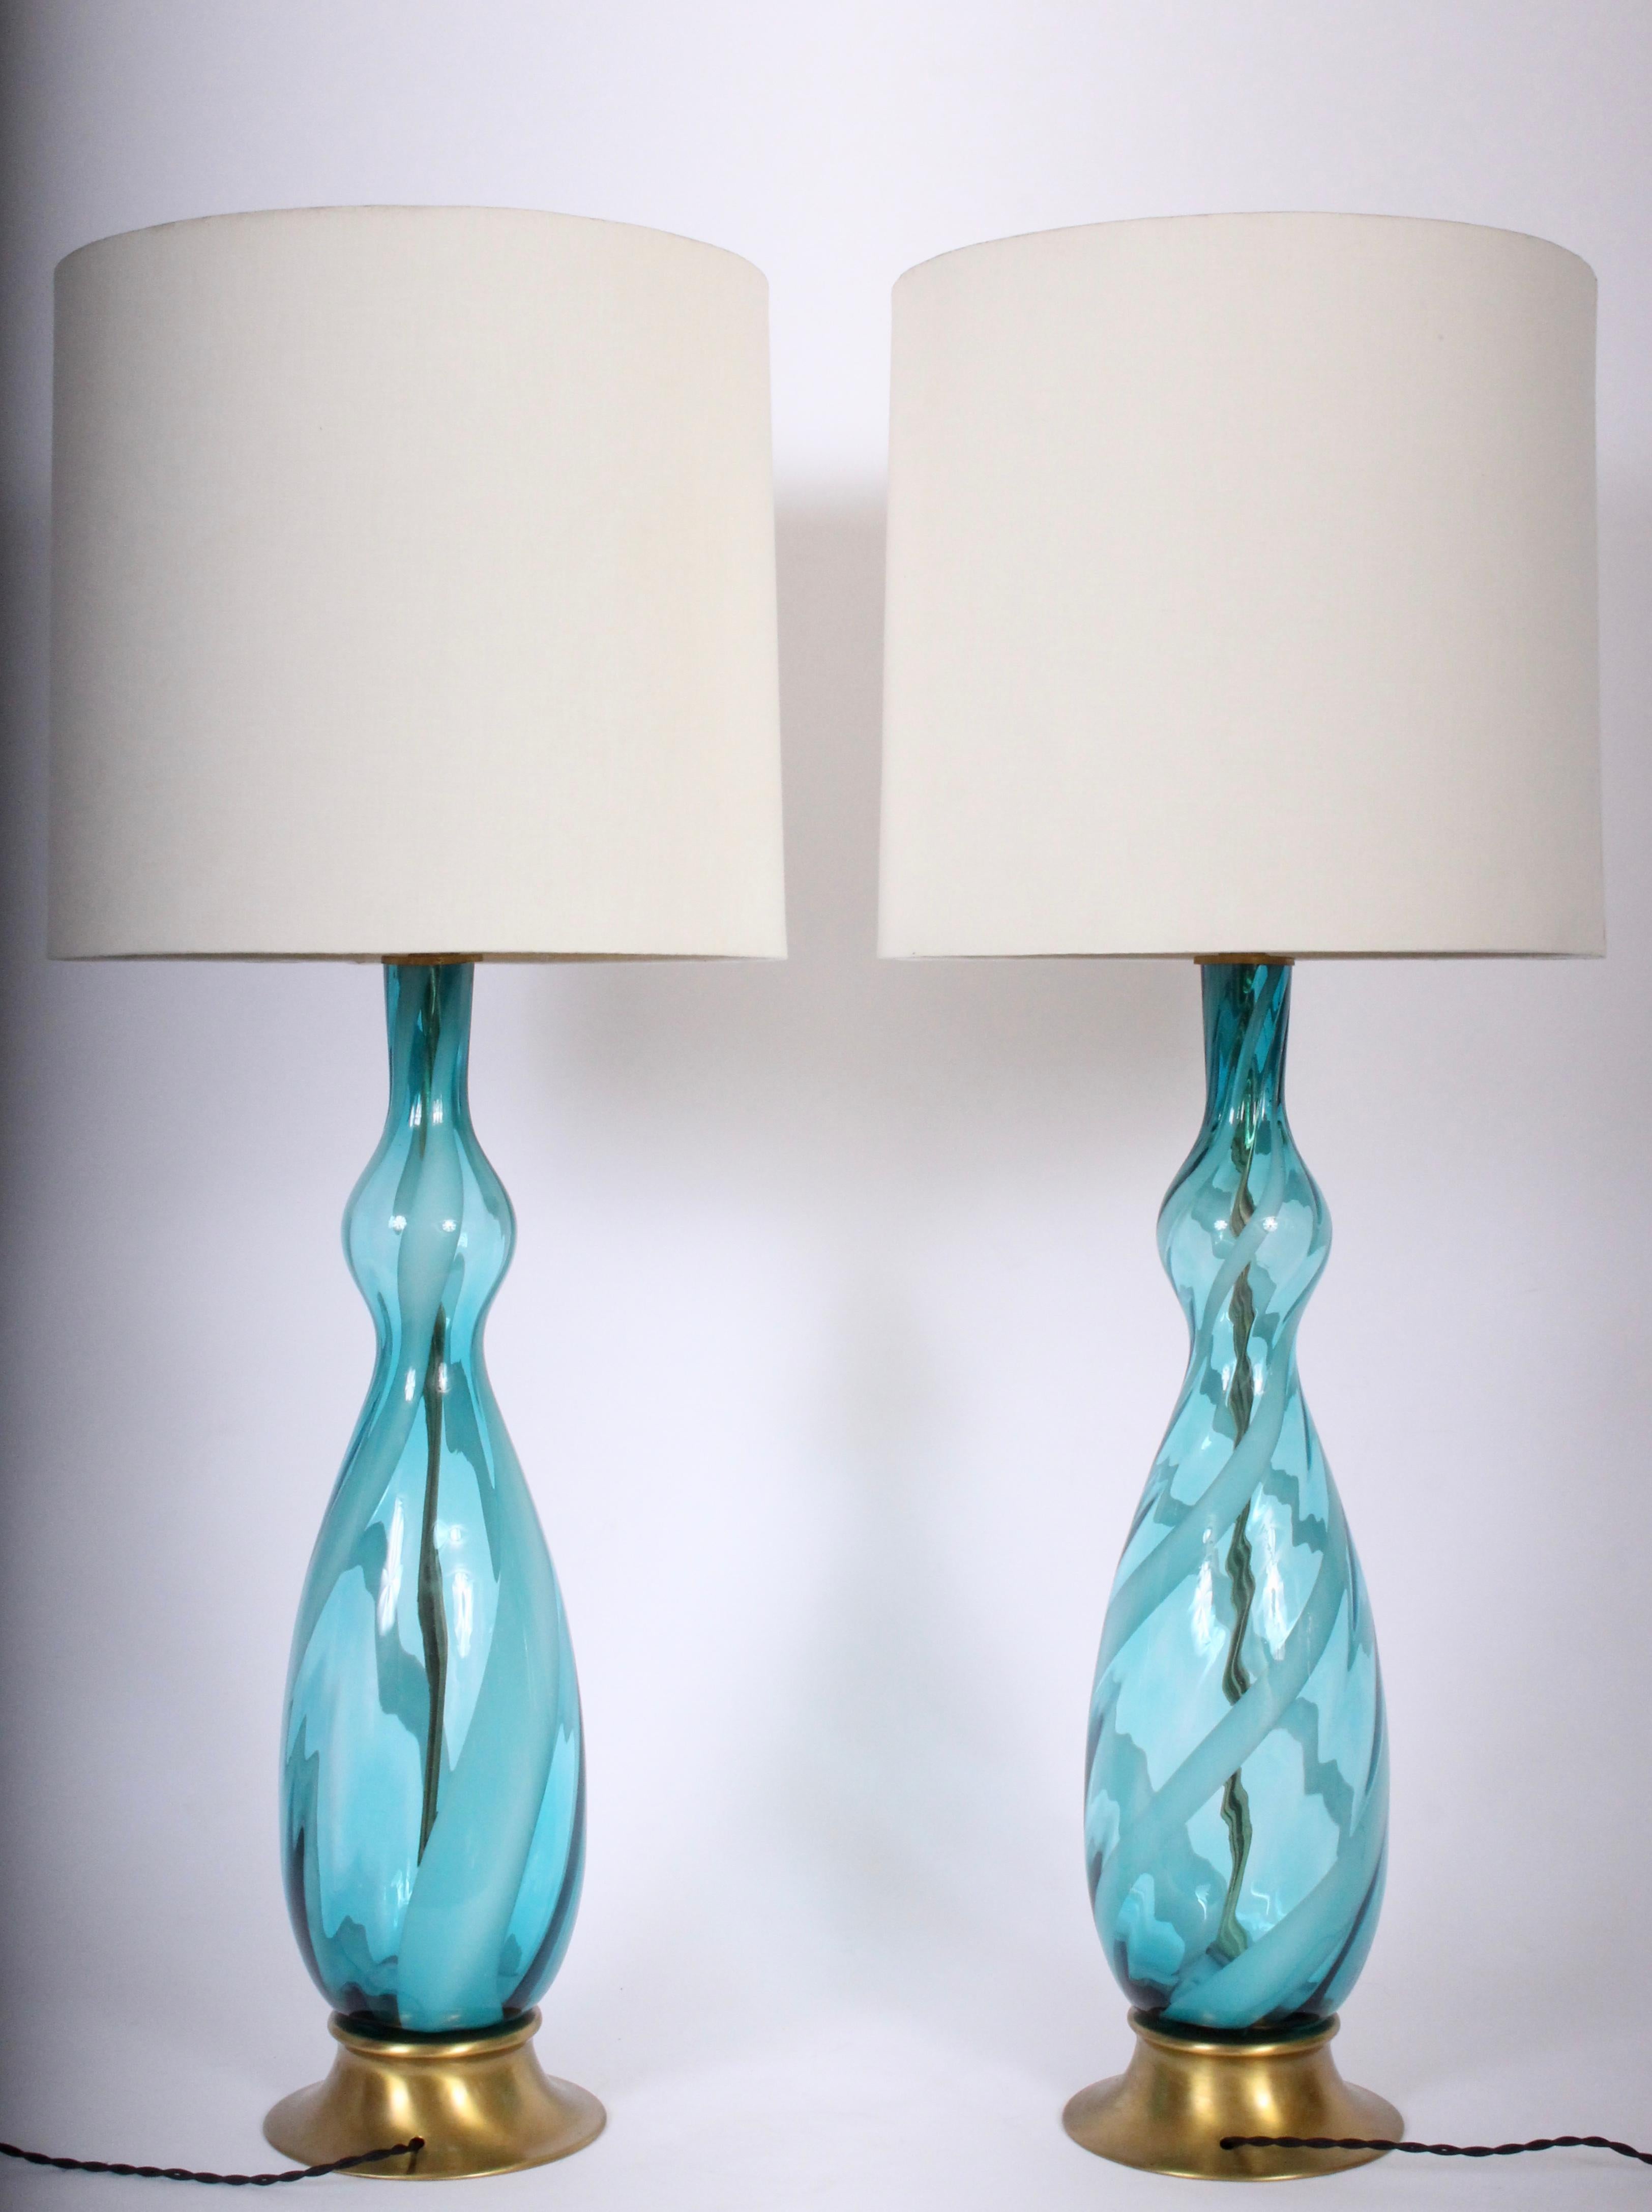 Italian Monumental Pair of Turquoise and White Swirl Murano Art Glass Table Lamps, 1960s